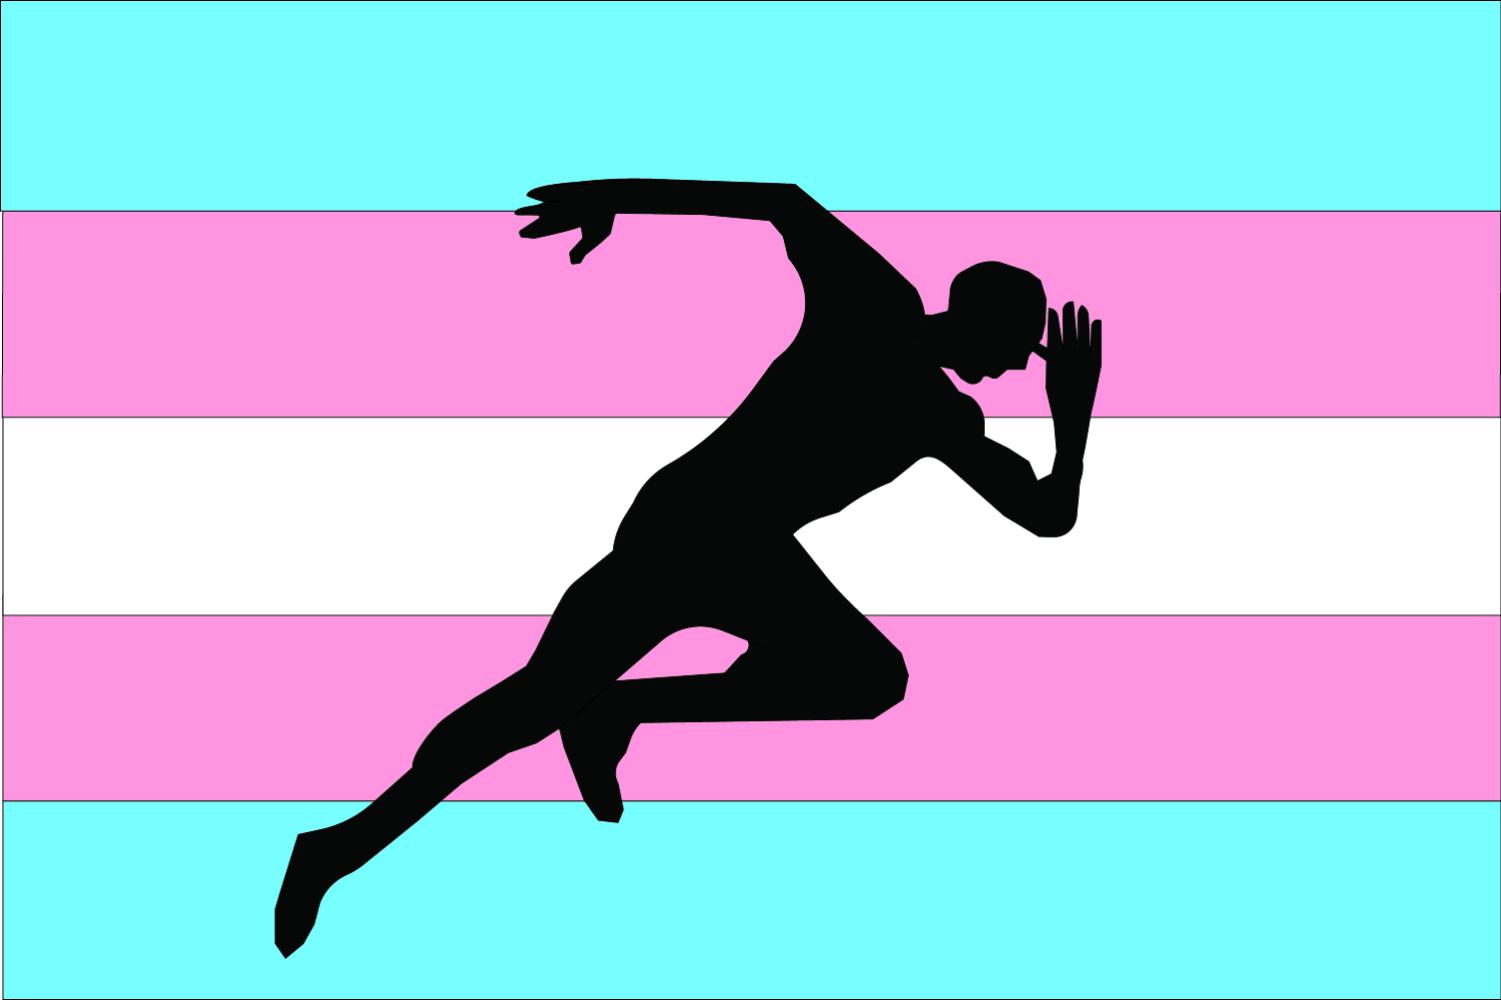 Op-Ed: Transgender athletes should compete with their gender, not